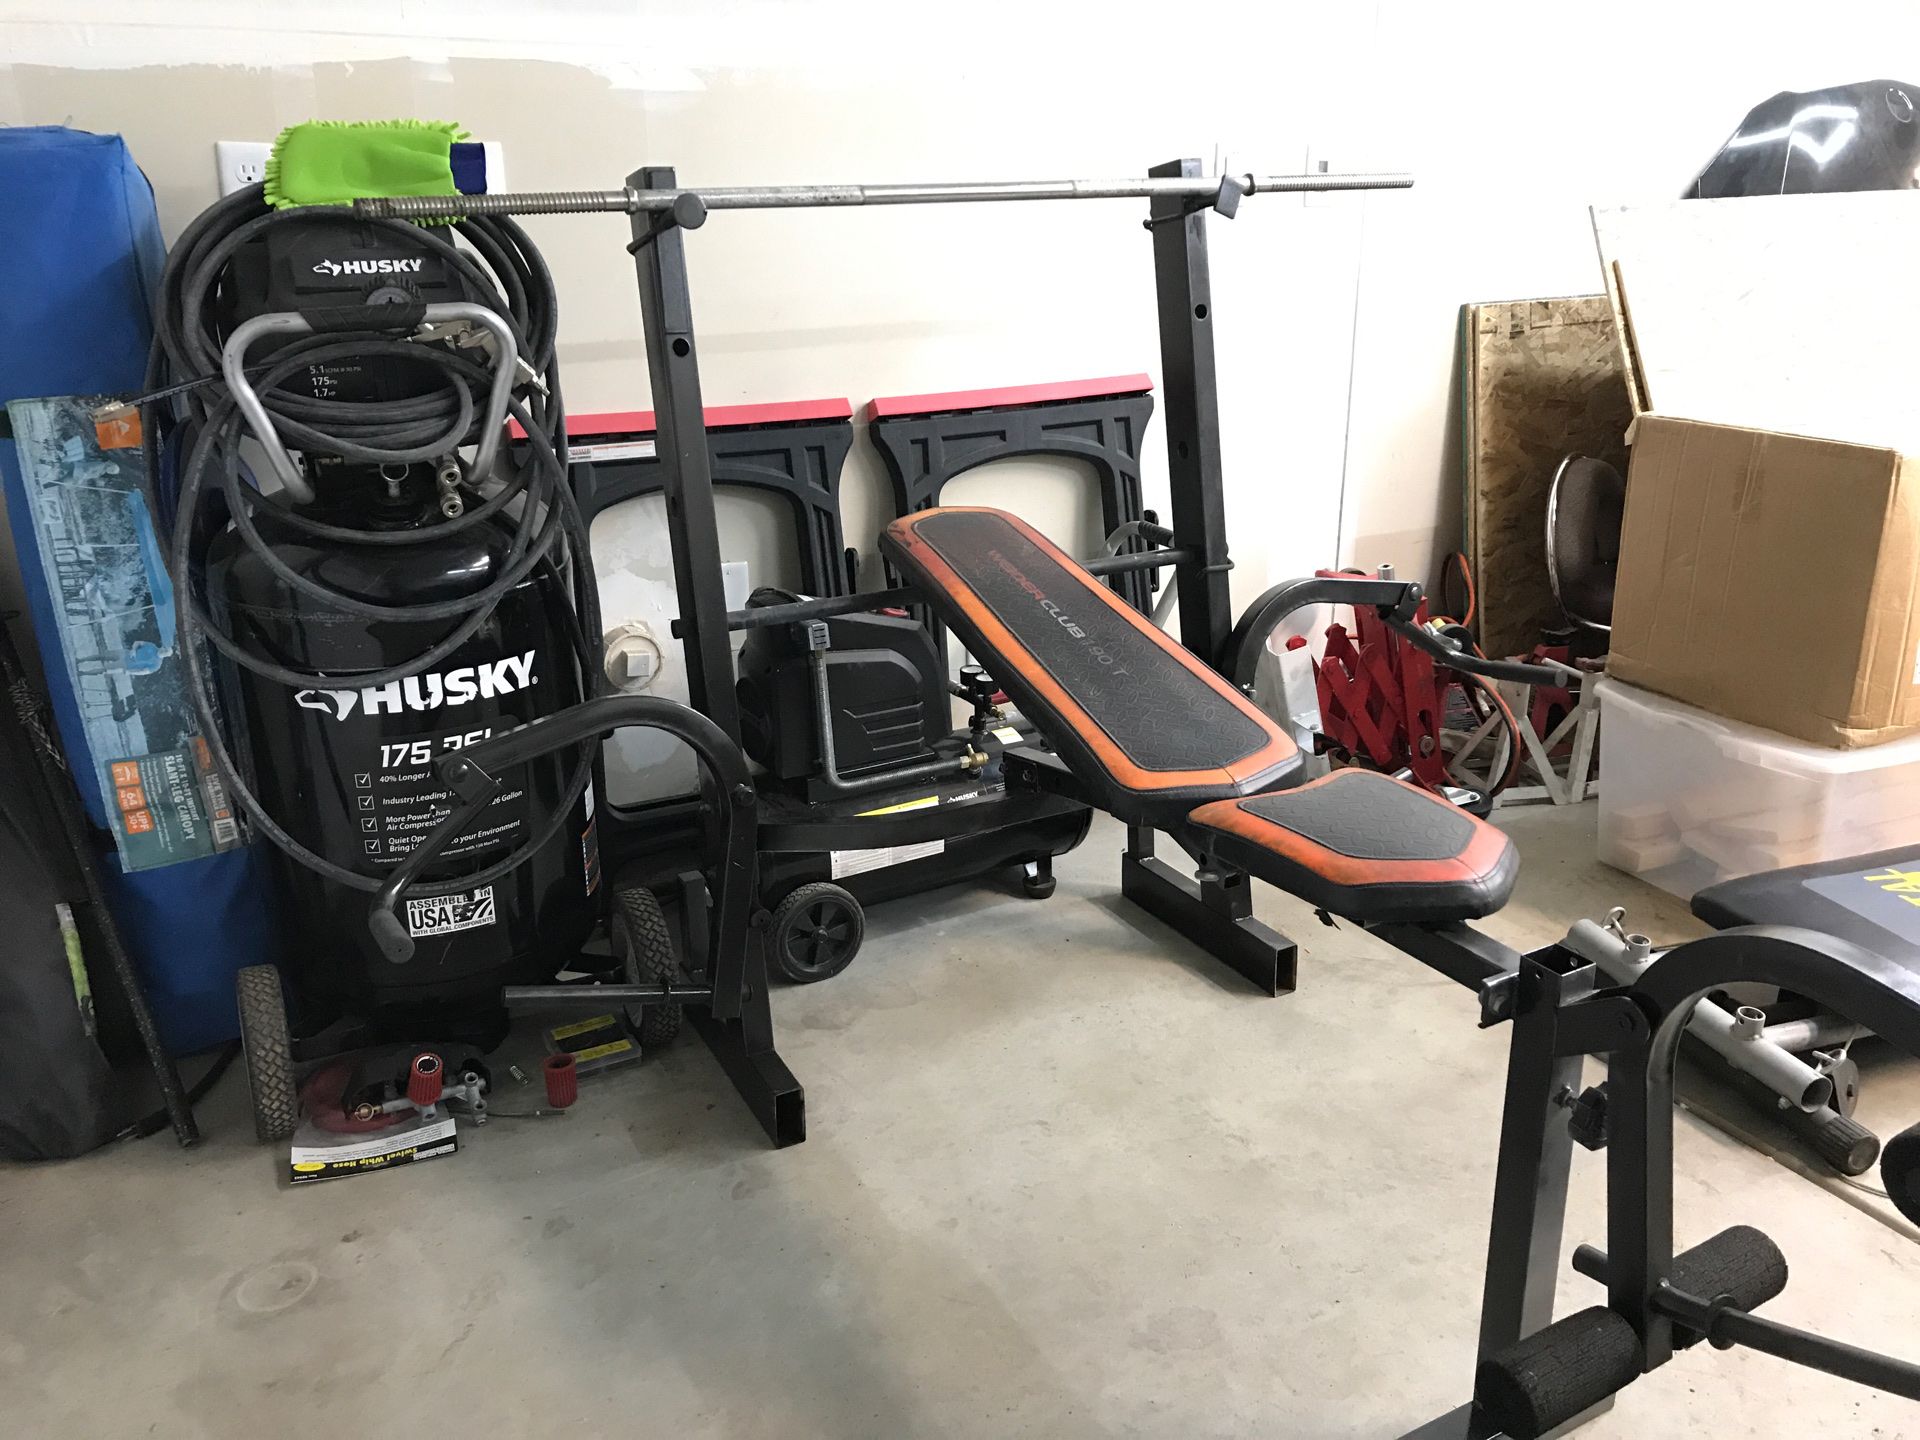 Weight bench with fly presses.